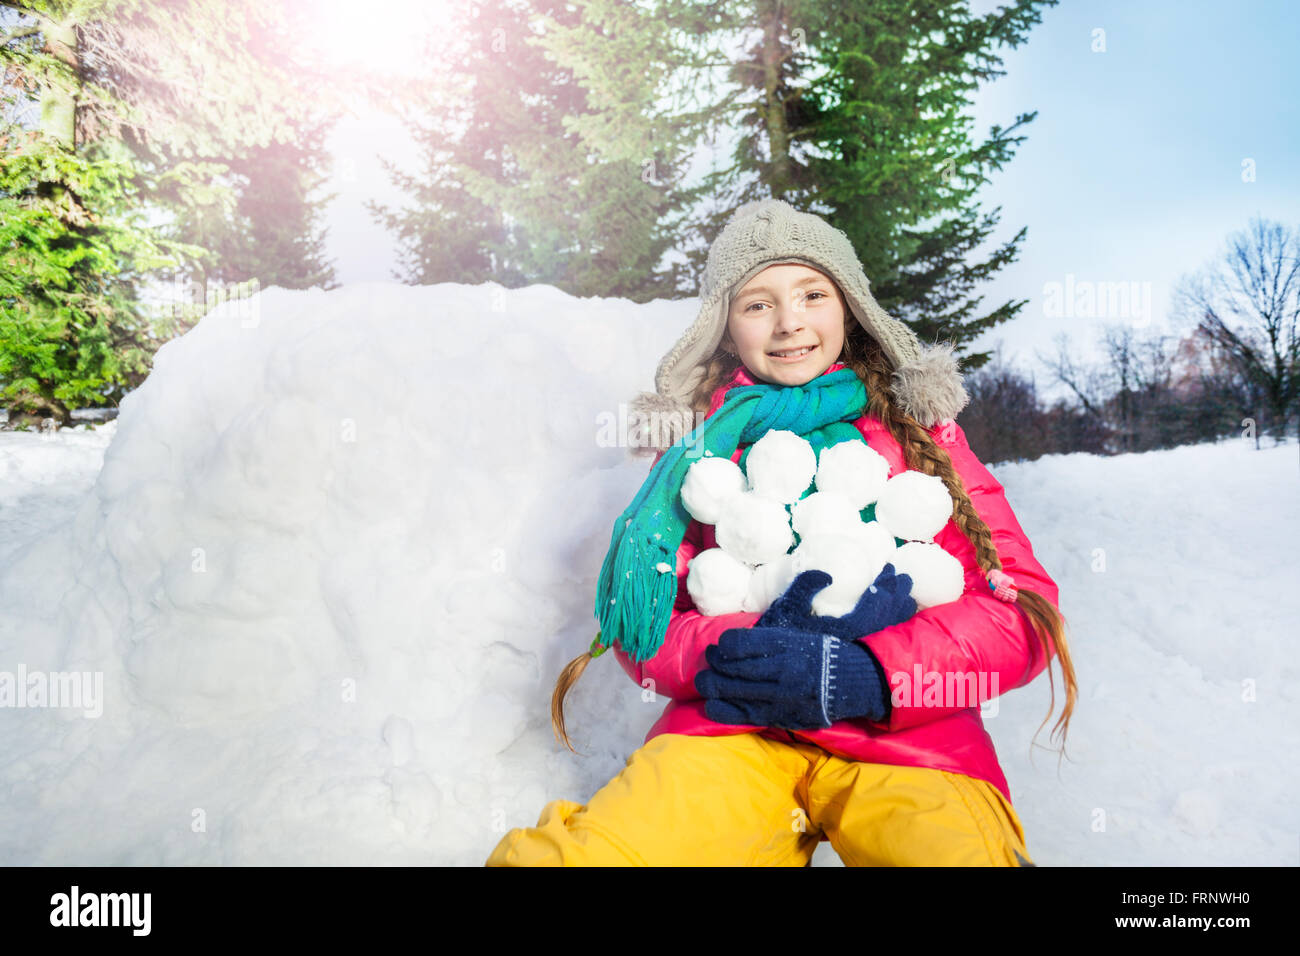 Girl have fun with snowball fight winter outdoor Stock Photo